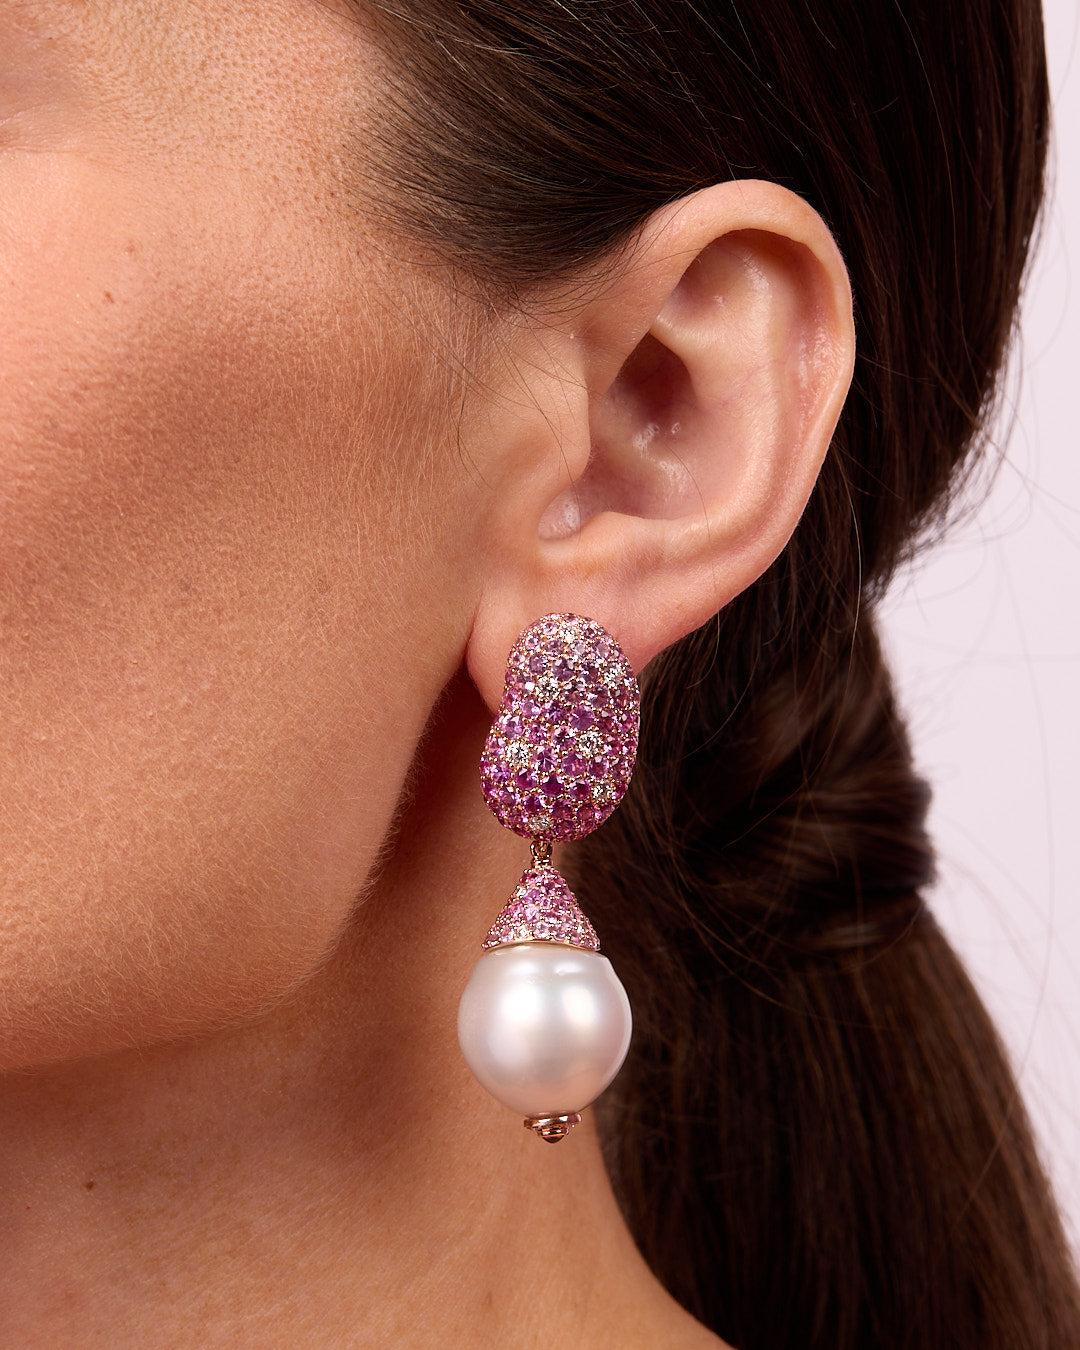 'Jelly Bean' Pink Sapphire and Diamonds with Australian South Sea Pearl Drop Earrings